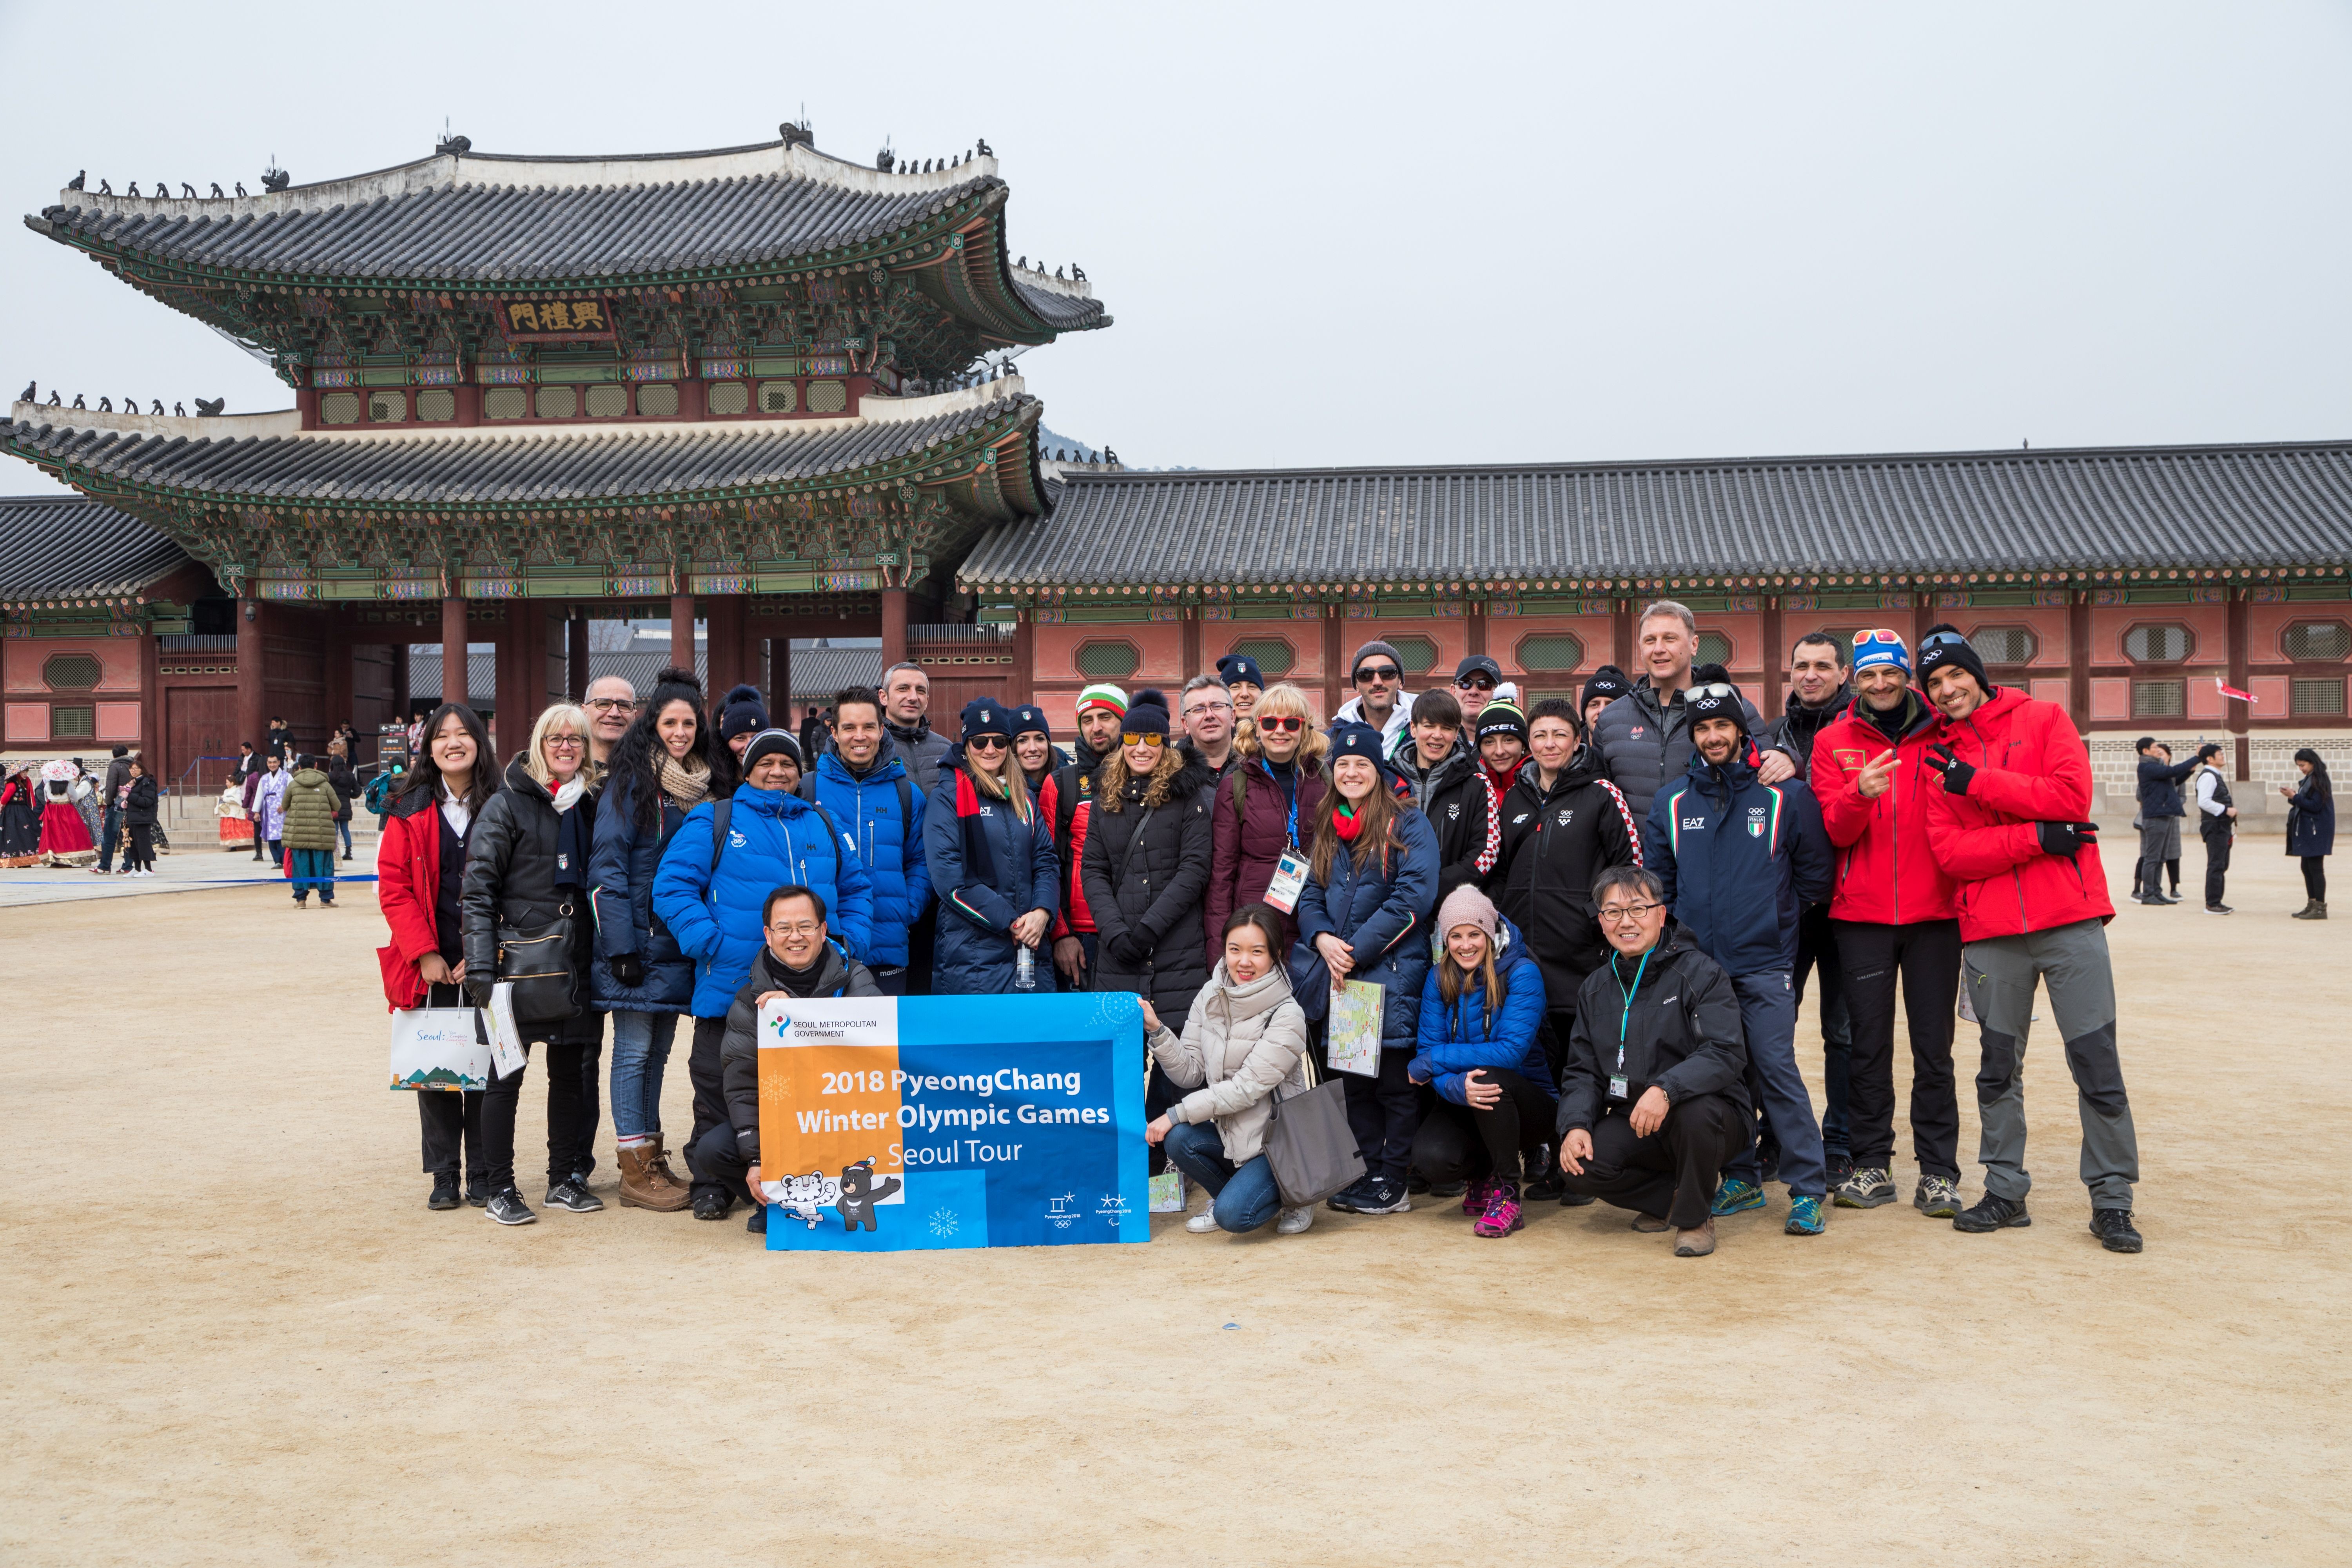 Winter Olympics Seoul Tour for Olympic athletes and officials